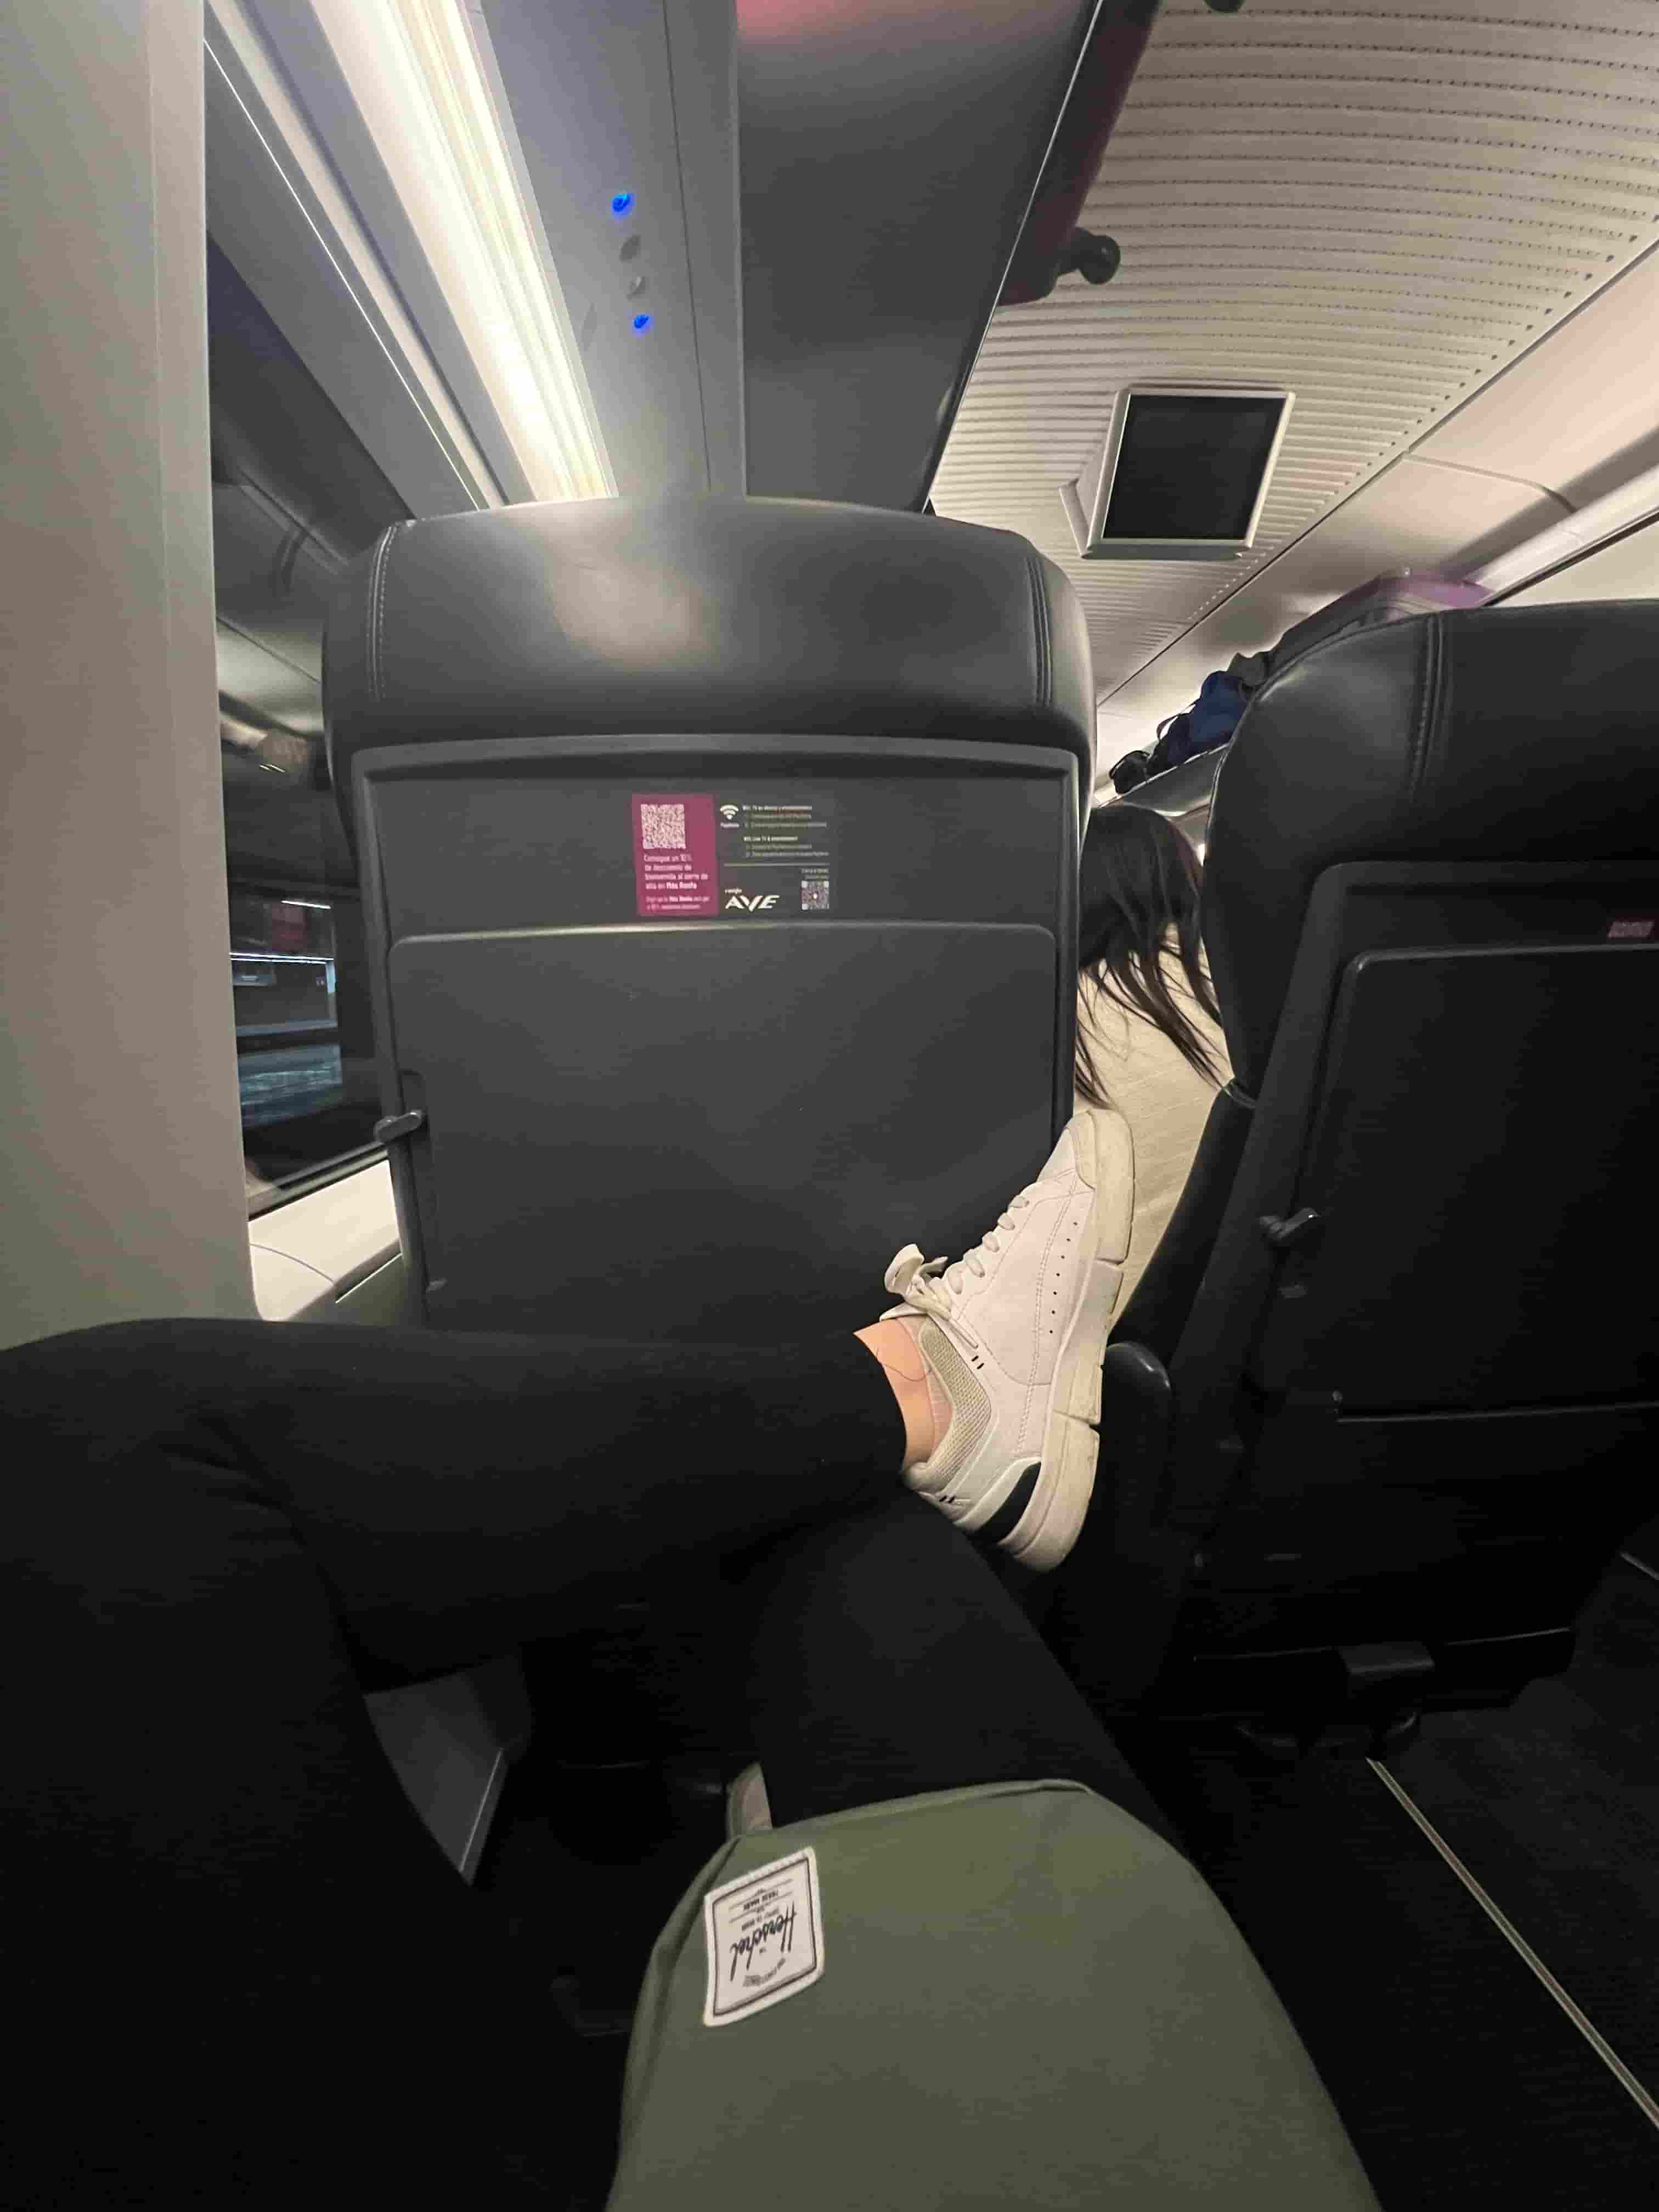 Sitting on board a Renfe AVE train - you can see the legroom available as the woman in the photo sits slouched, with her legs crossed